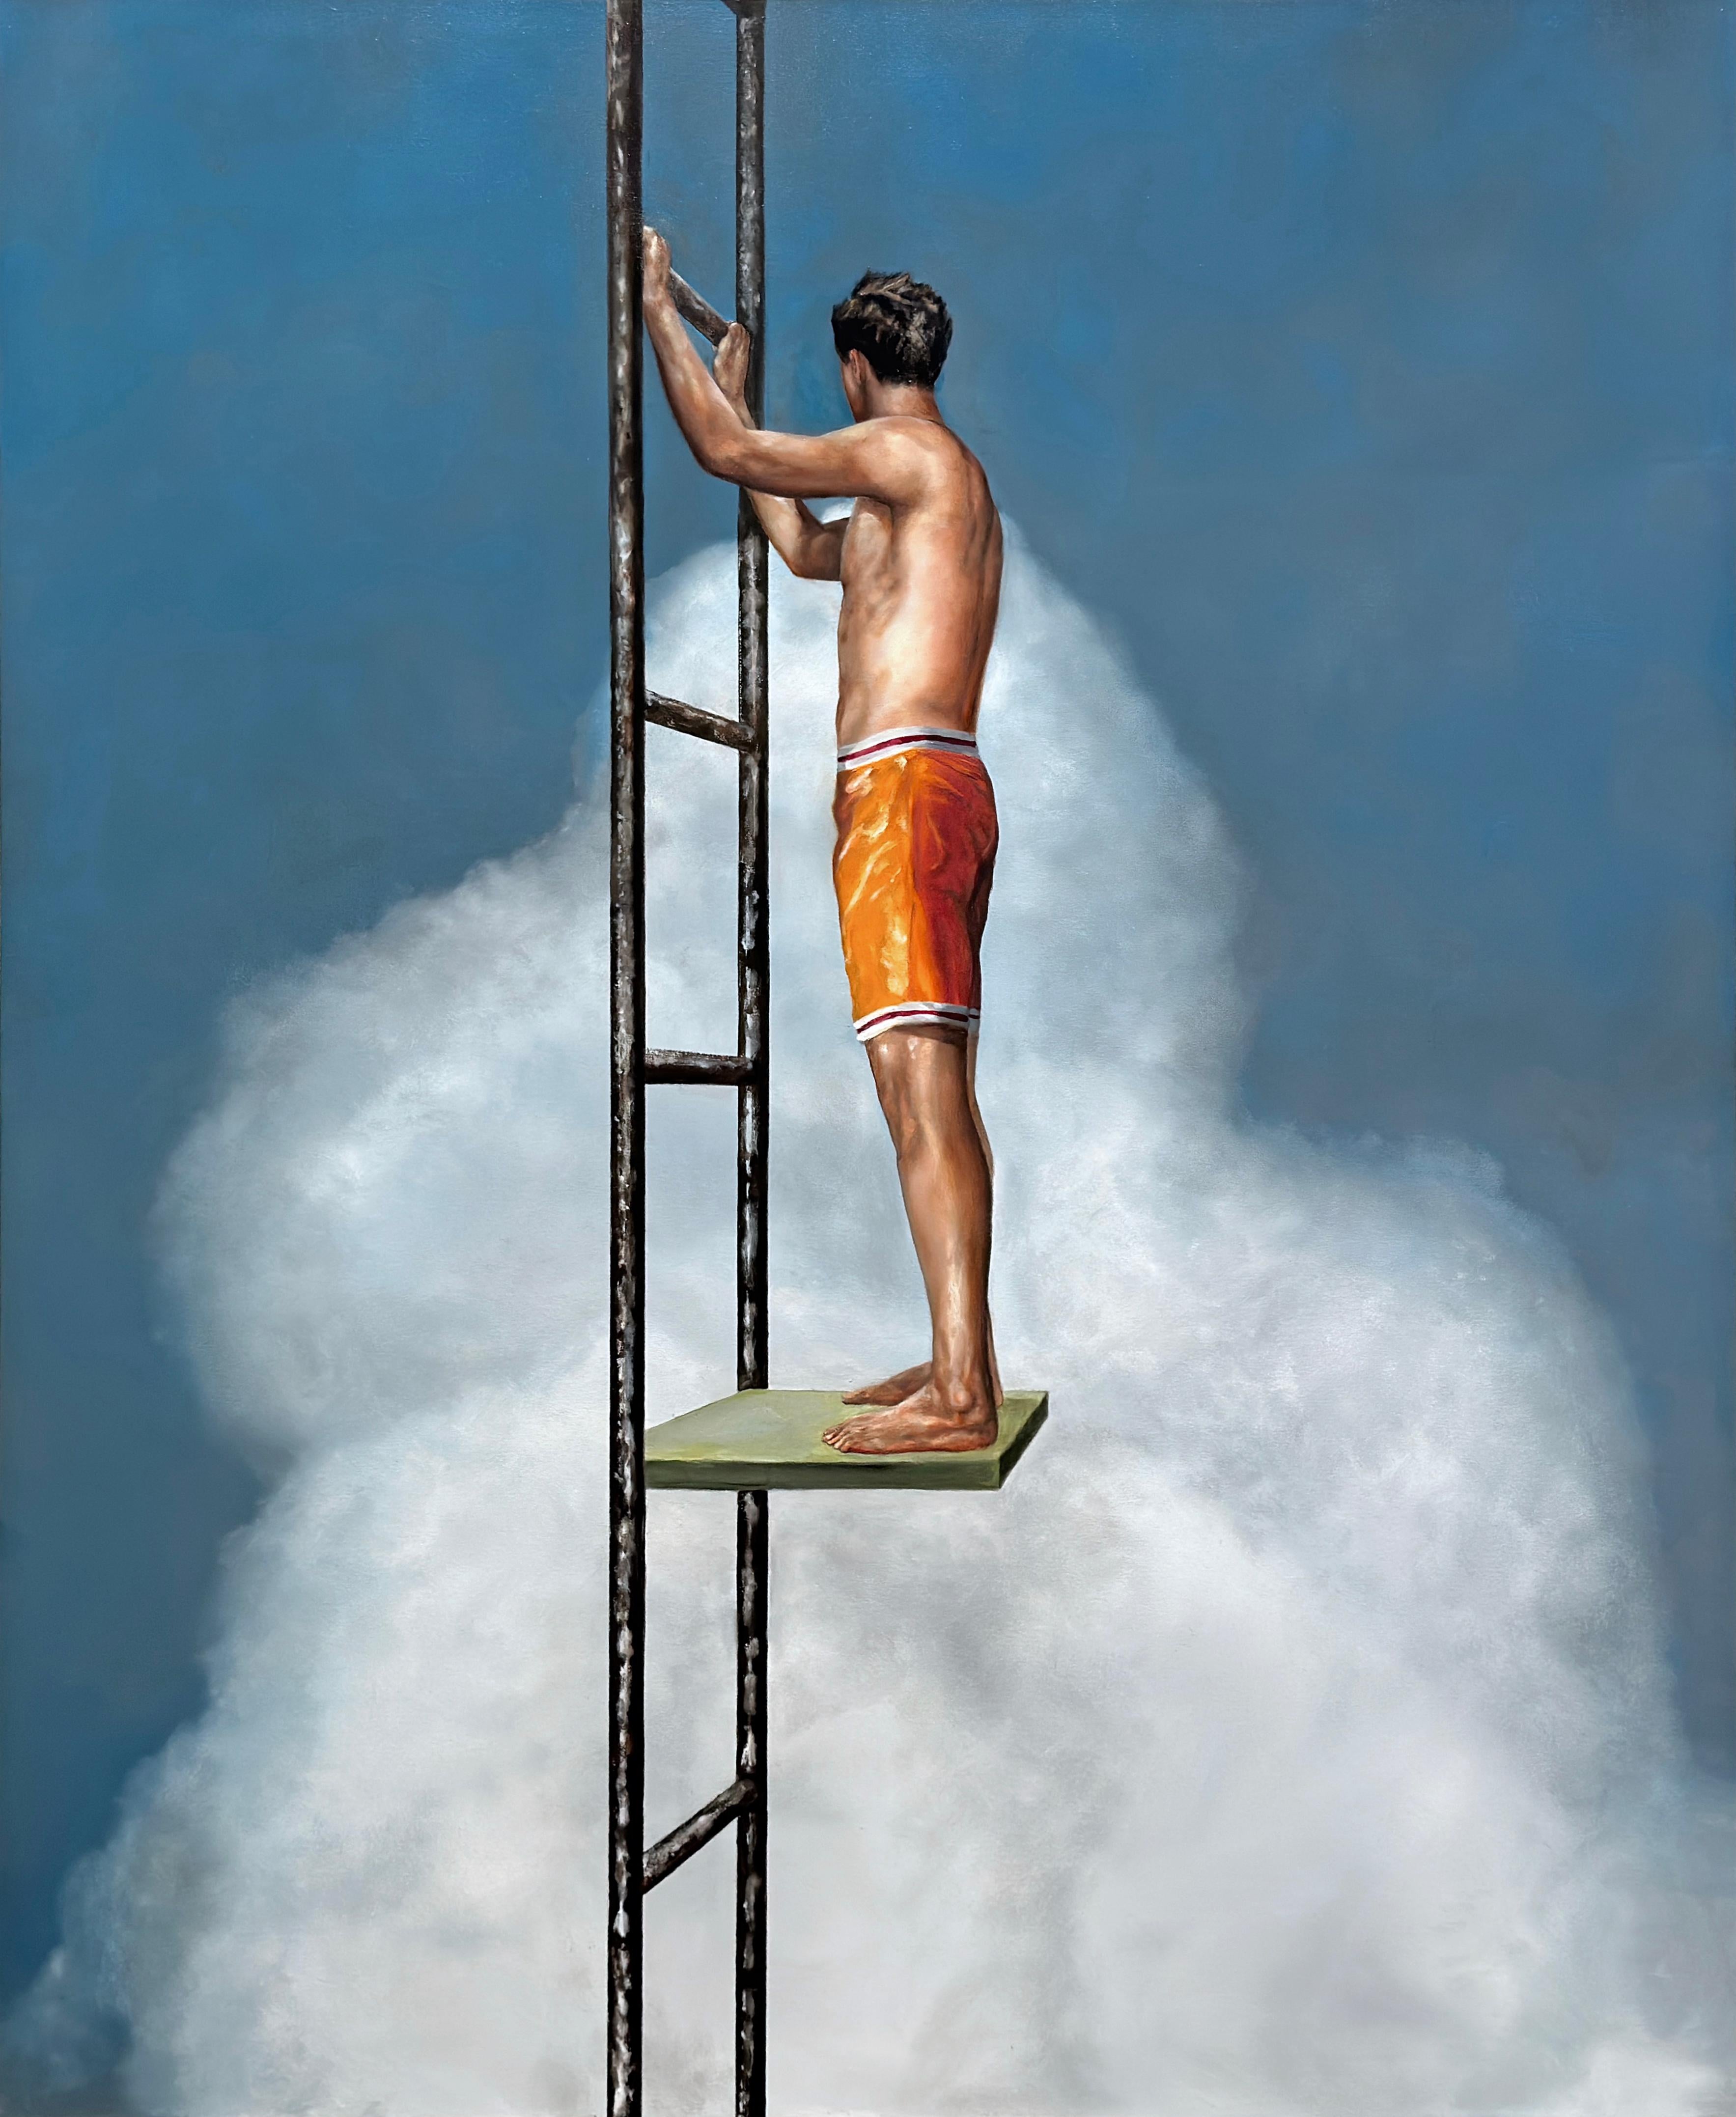 Eric Zener Figurative Painting - ABOVE IT ALL - Contemporary Realism / Male Figure Swimmer / Ladder Journey Sky